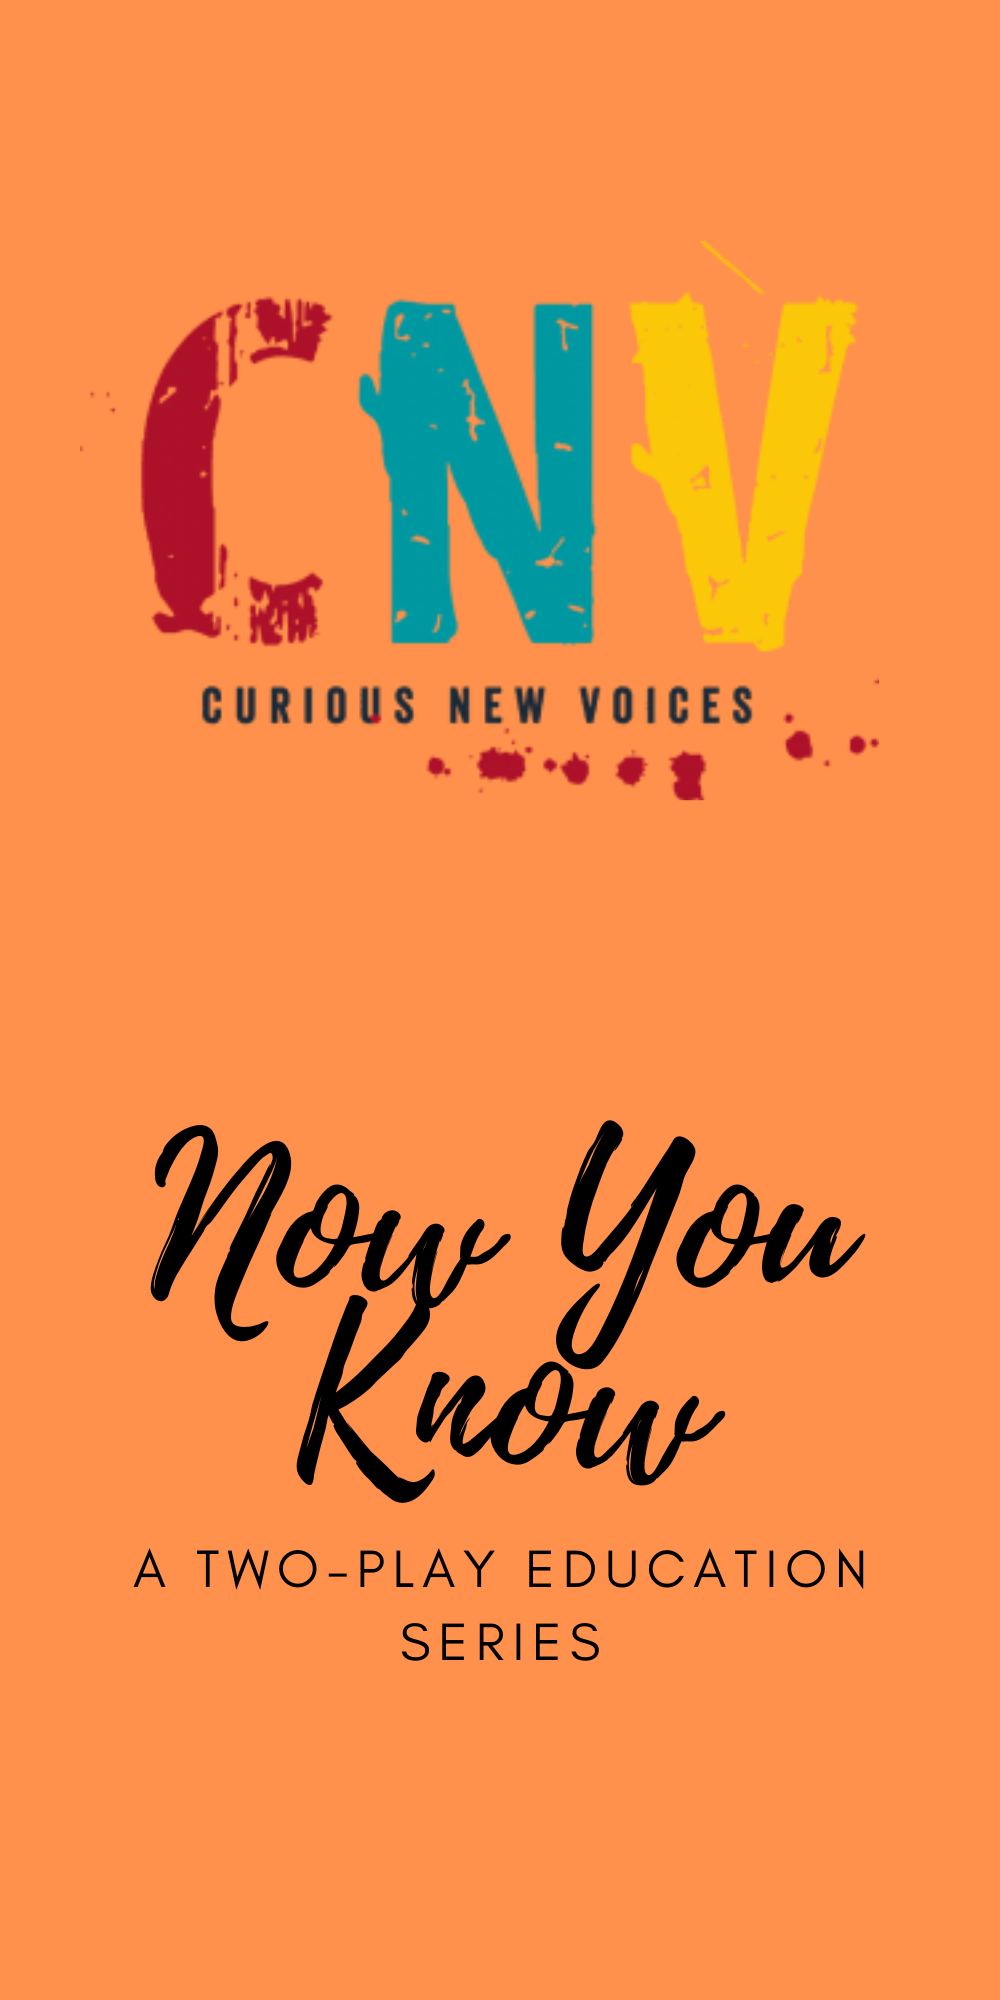 Curious New voices Now You Know